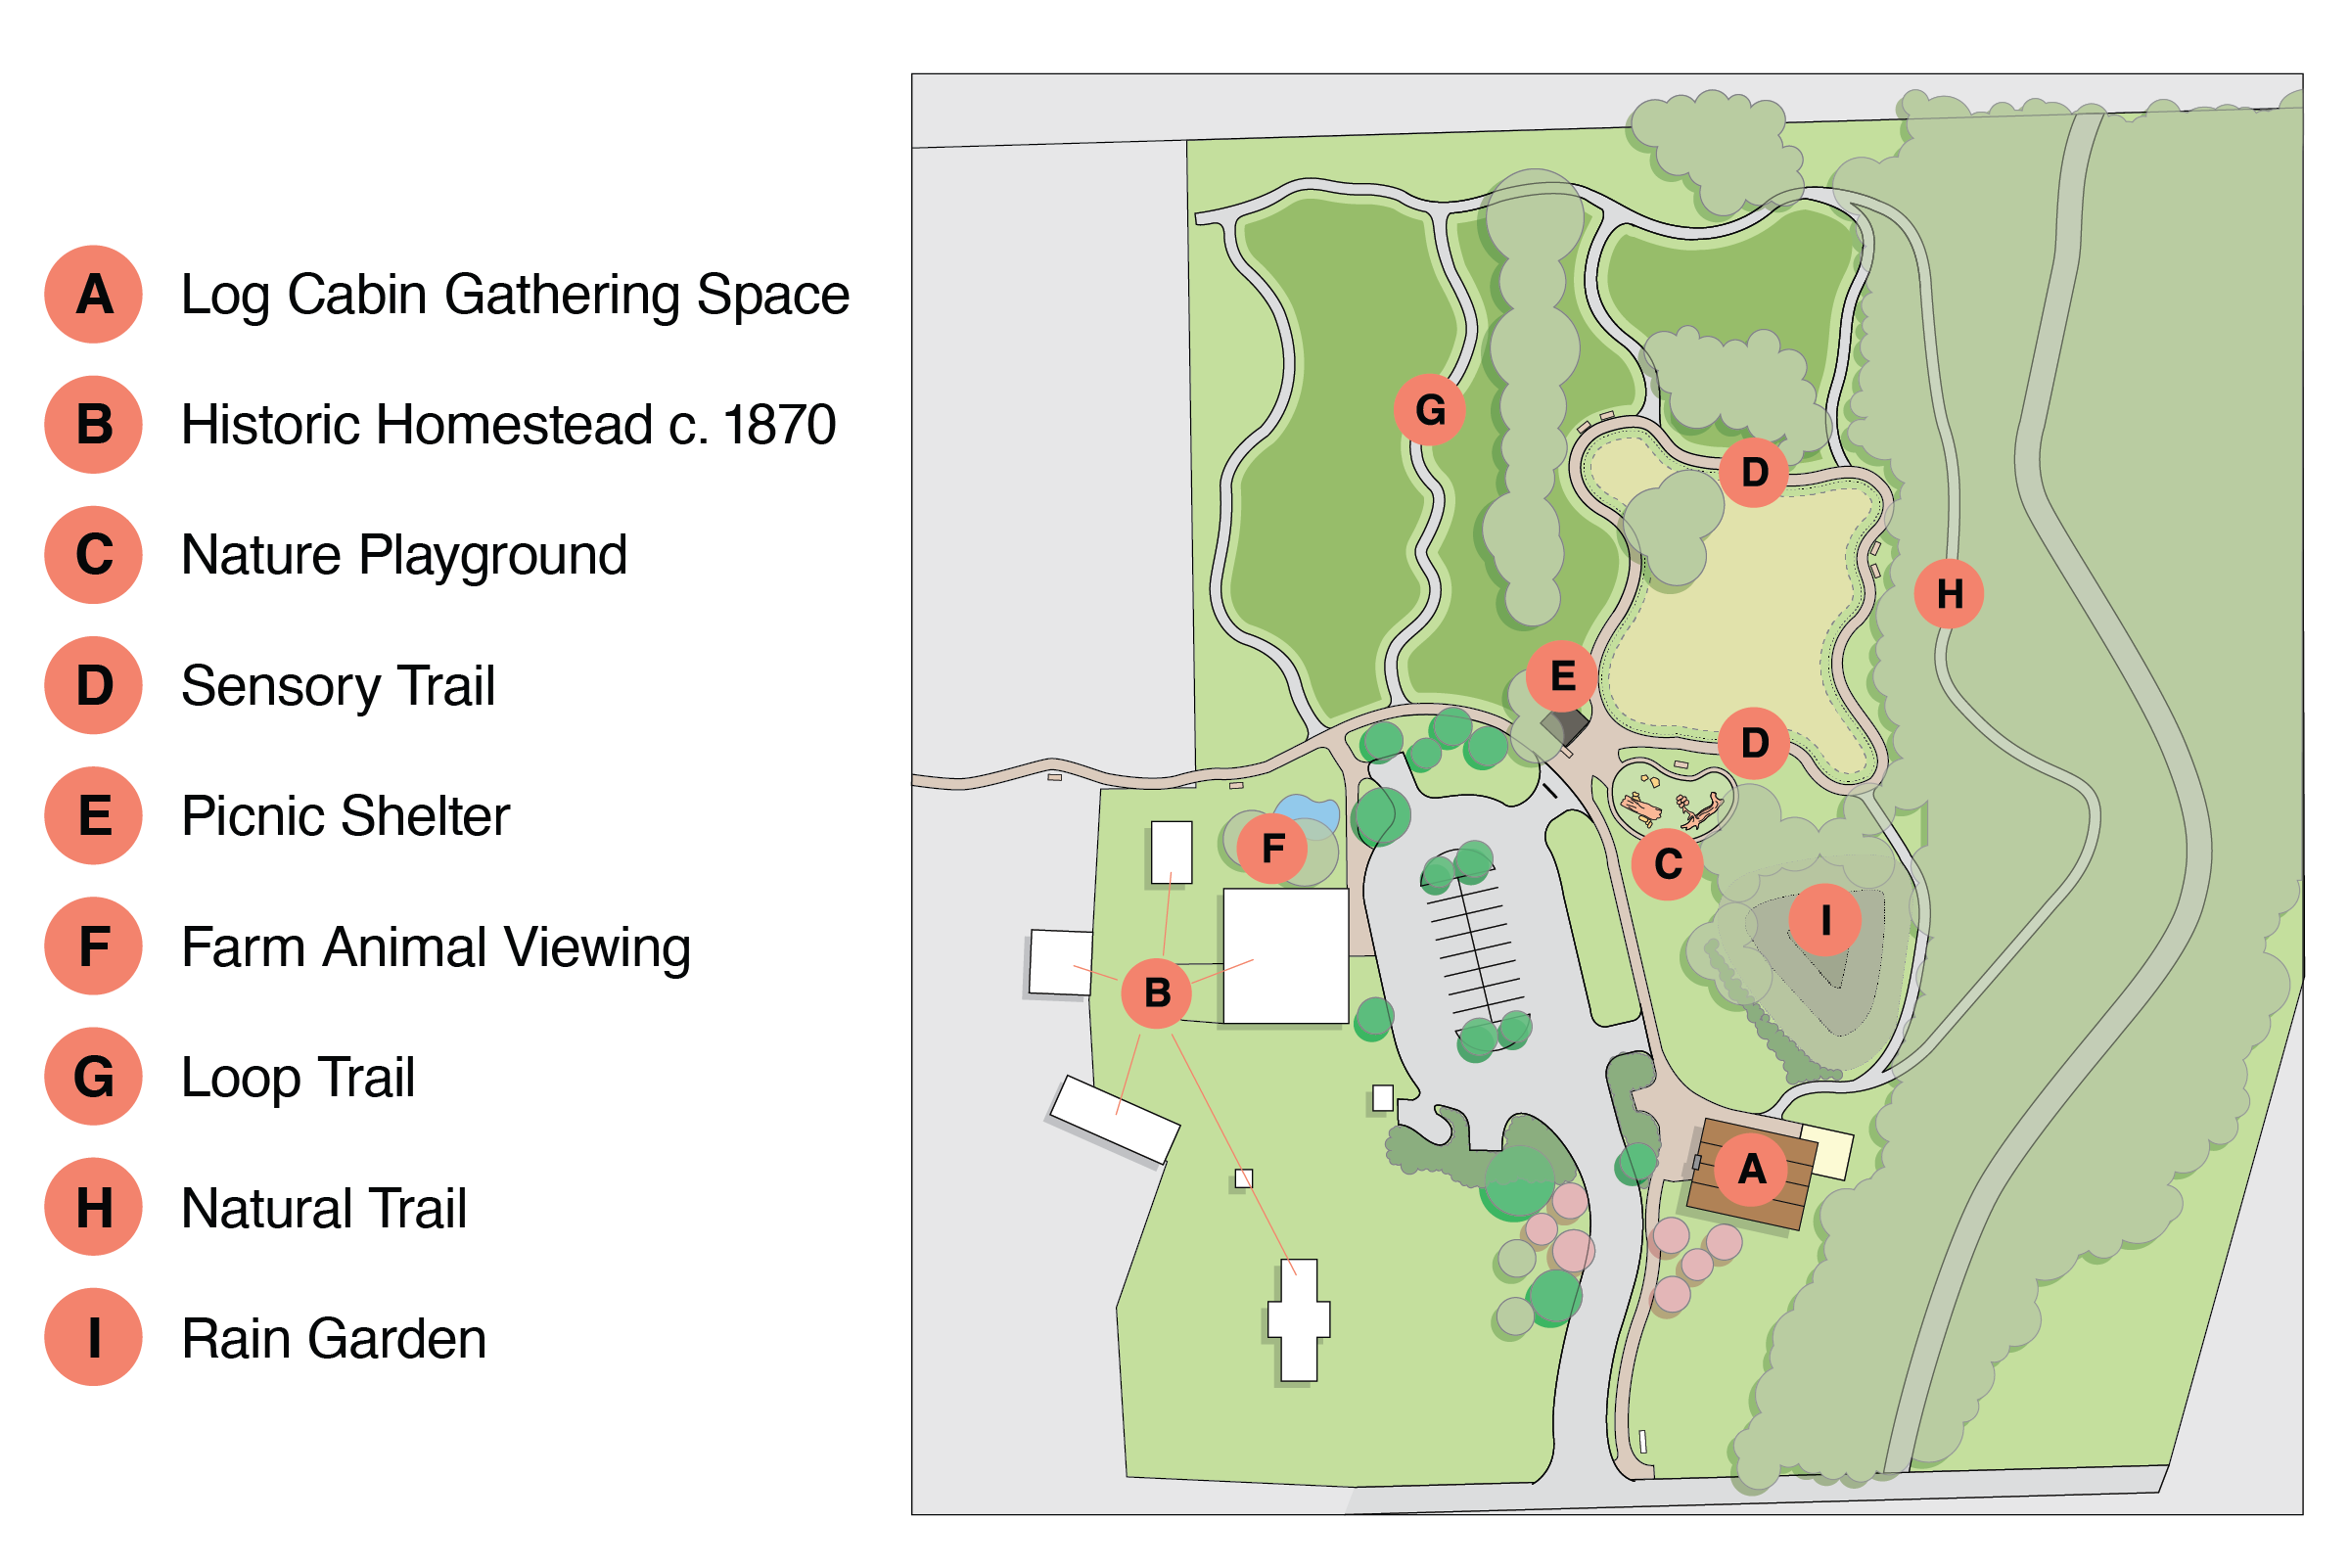 Artist rendering map of Marylands Farm Park property/attractions including (A) Log Cabin Gathering Space, (B) Historic Homestead c. 1870, (C) Nature Playground, (D) Sensory Trail, (E) Picnic Shelter, (F) Farm Animal Viewing, (G) Loop Trail, (H) Natural Trail, (I) Rain Garden